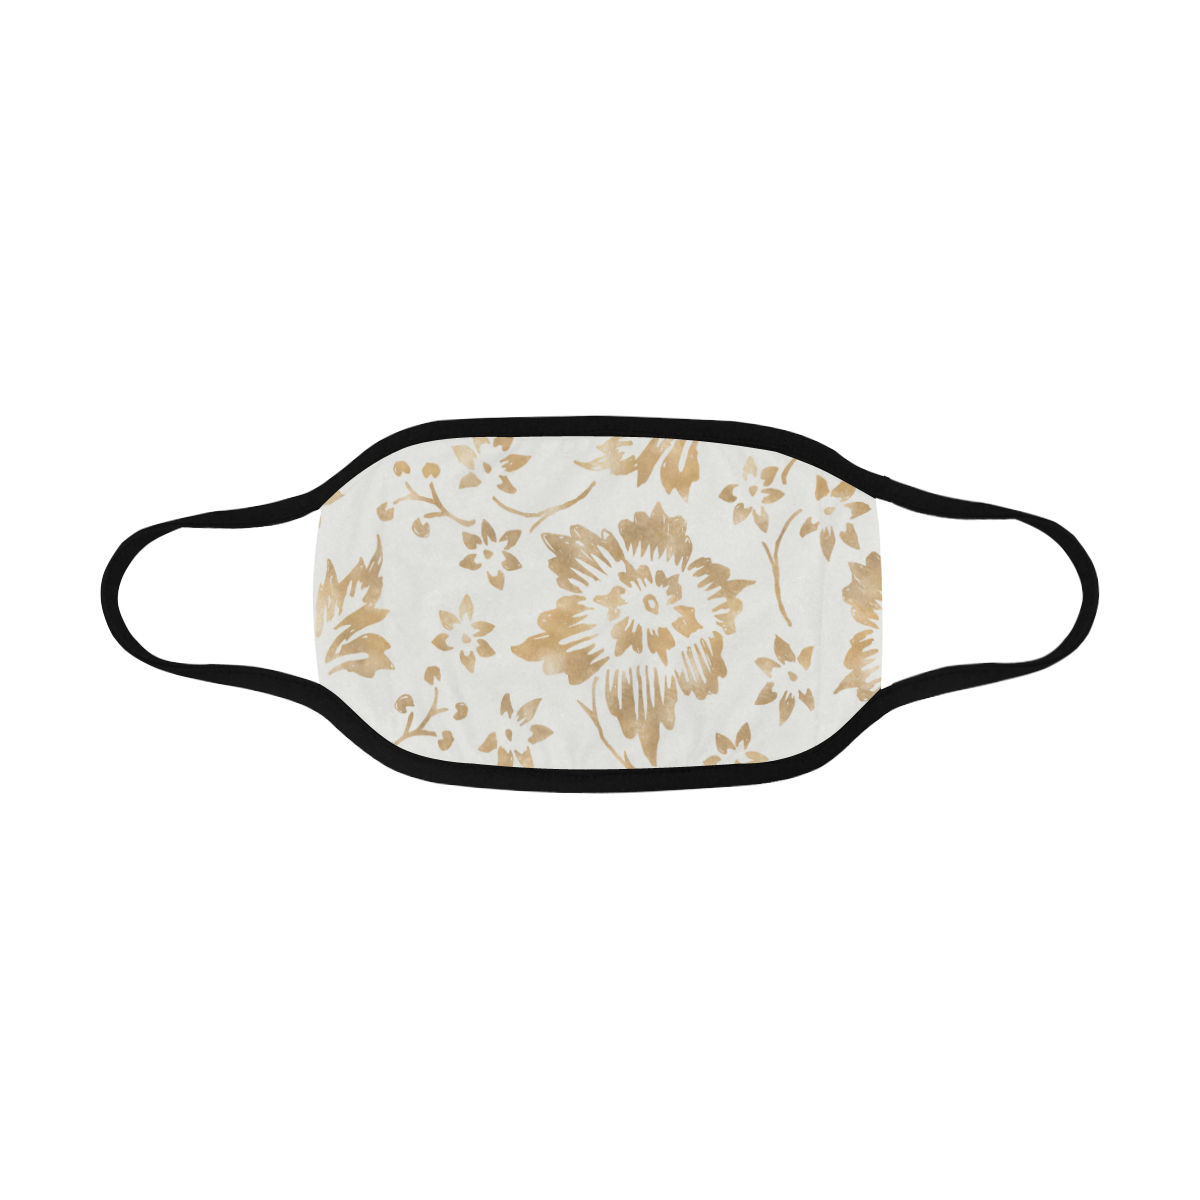 Gold Floral Mouth Mask Mouth Mask